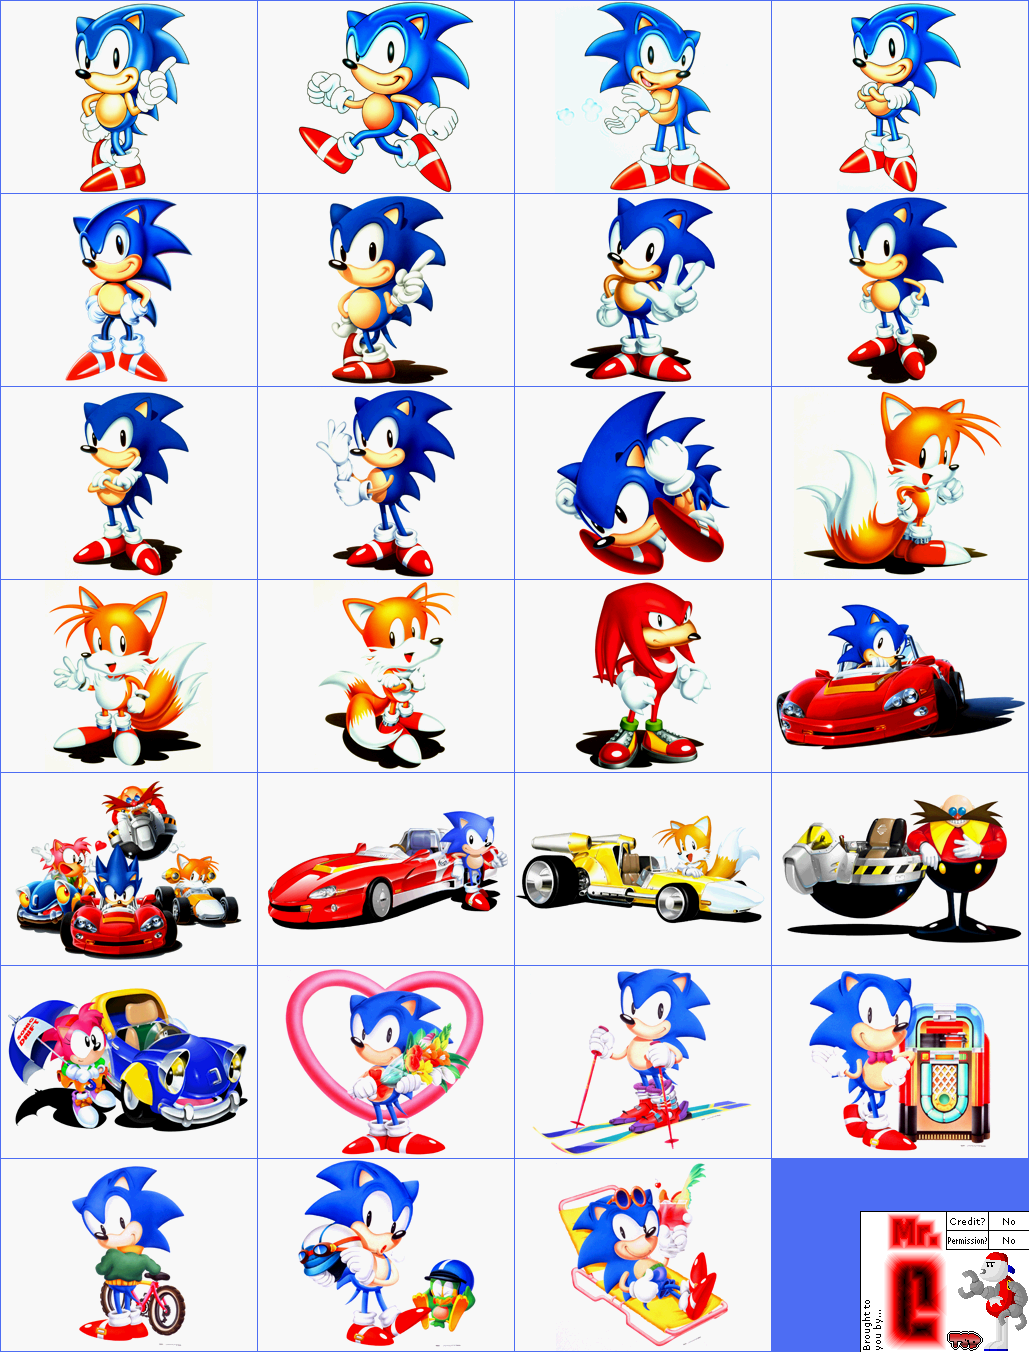 DS / DSi - Sonic Classic Collection - Game Select - The Spriters Resource